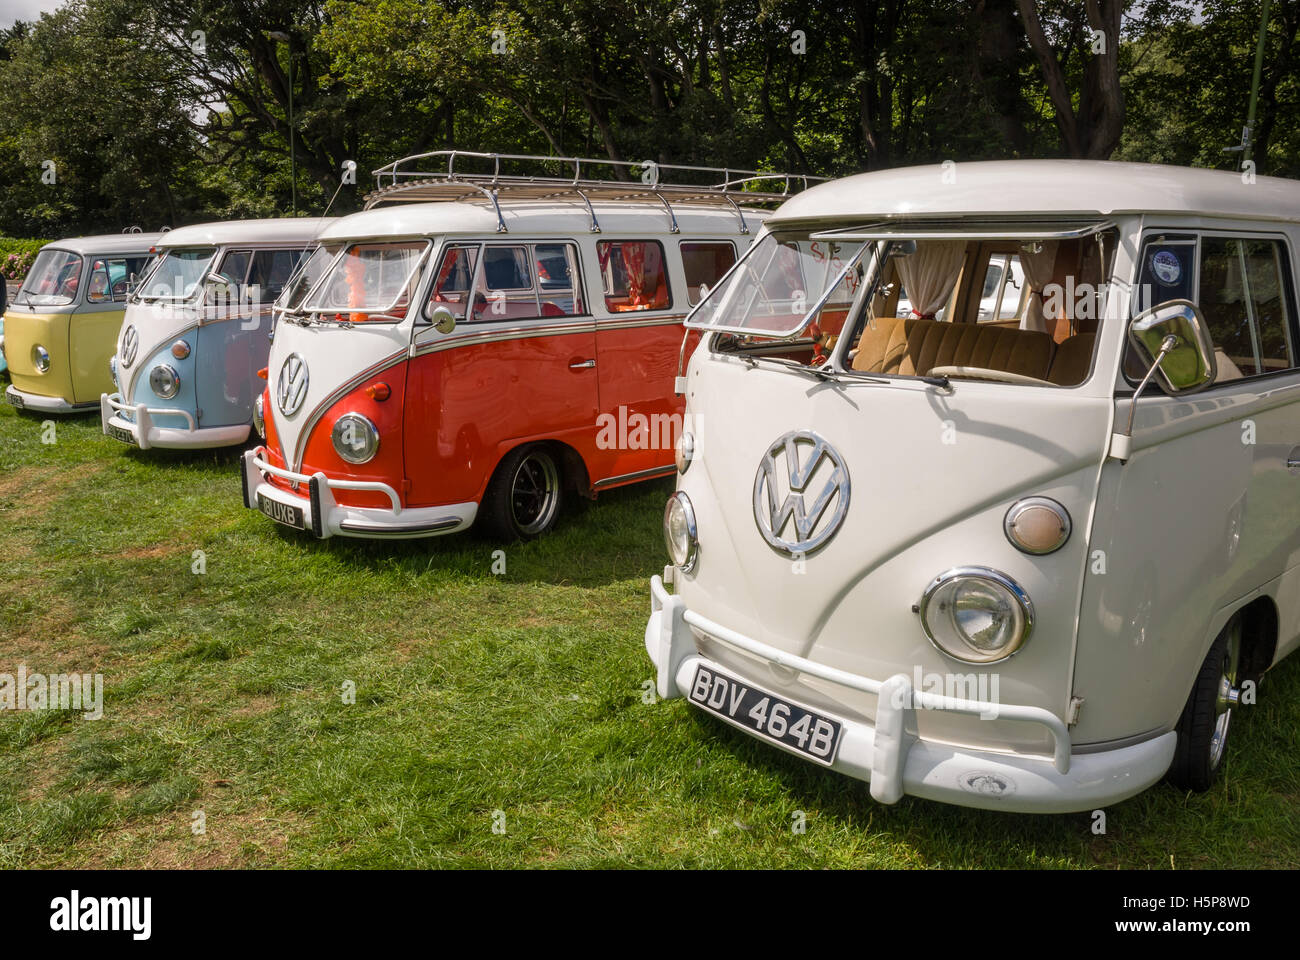 A line of split screen VW camper vans on show at Paignton Green with trees in the background Stock Photo